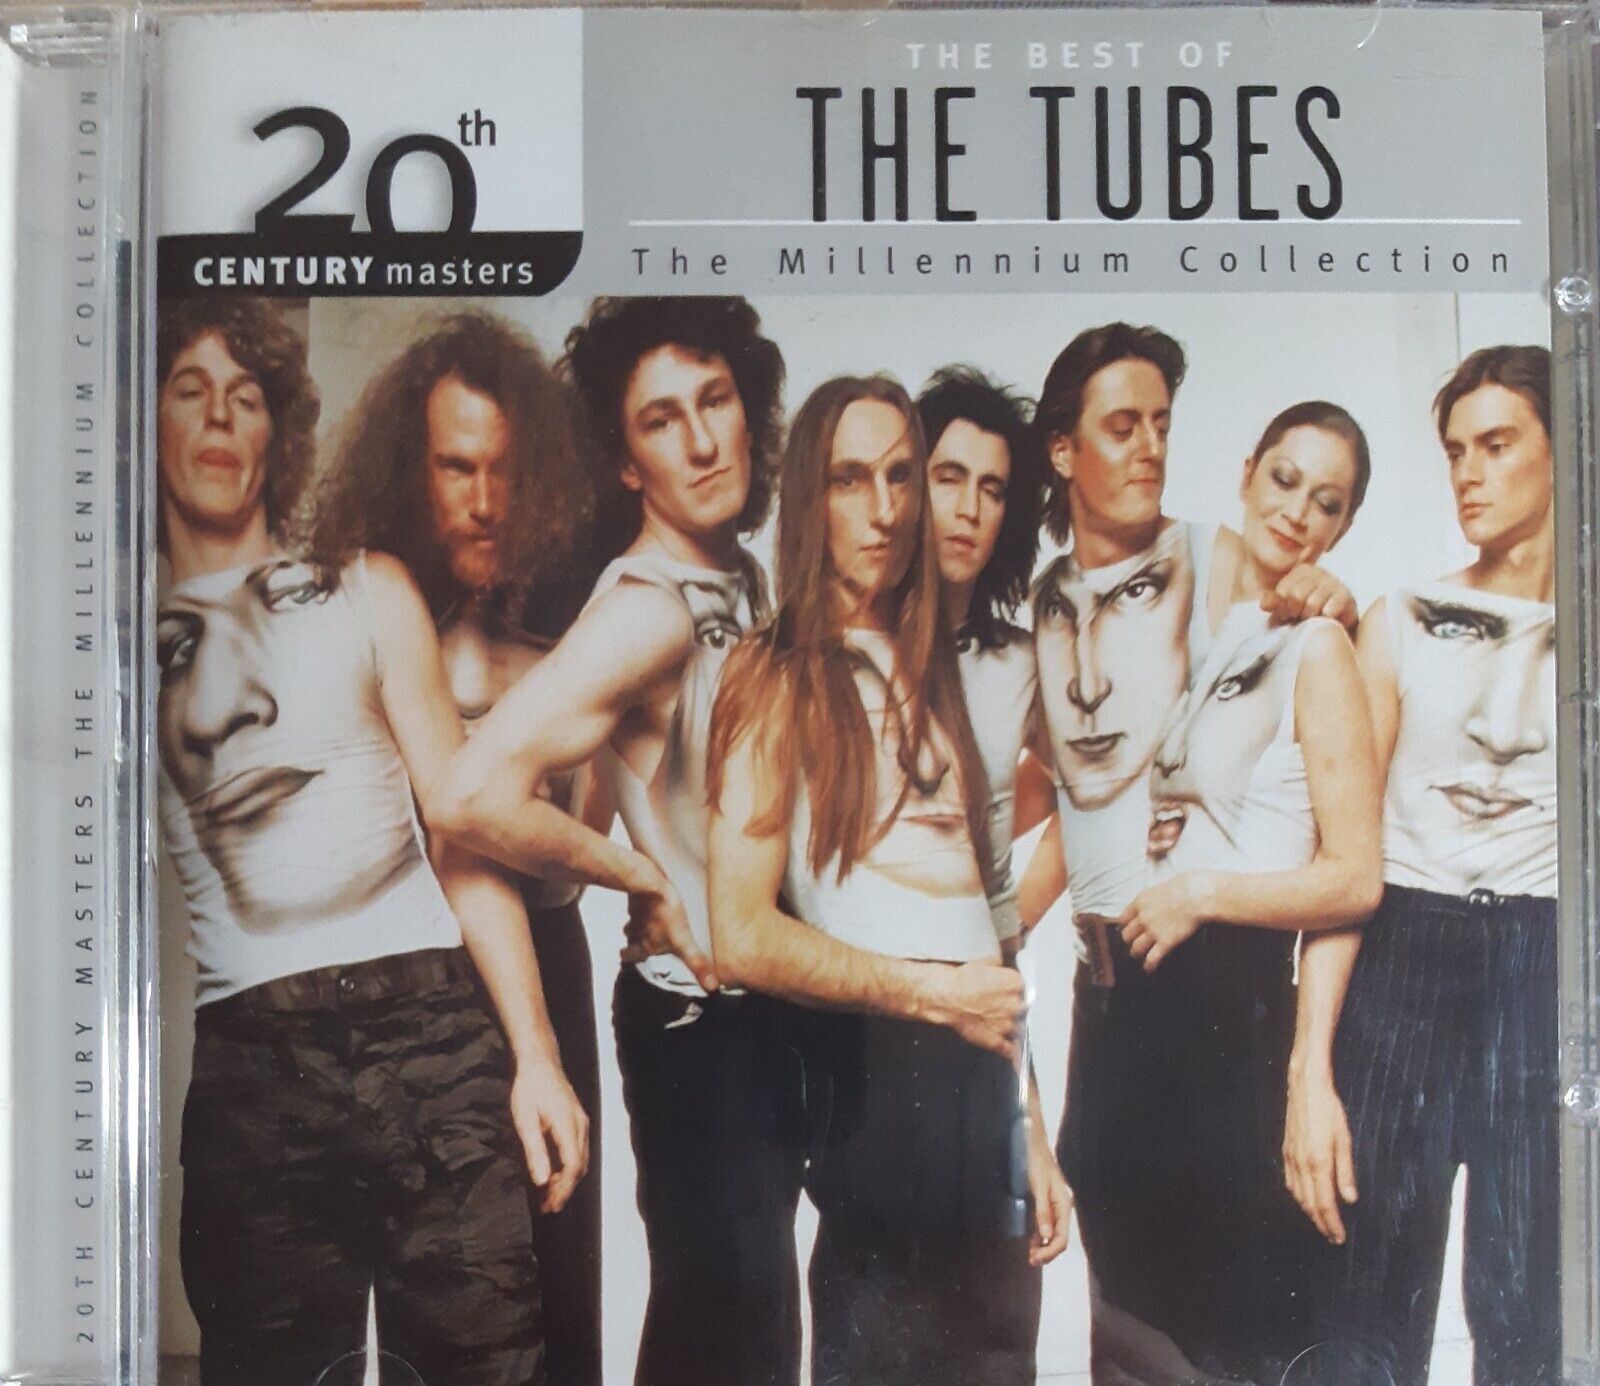 The Tubes - The Best Of The Tubes. CD. Near Mint Used Condition. 